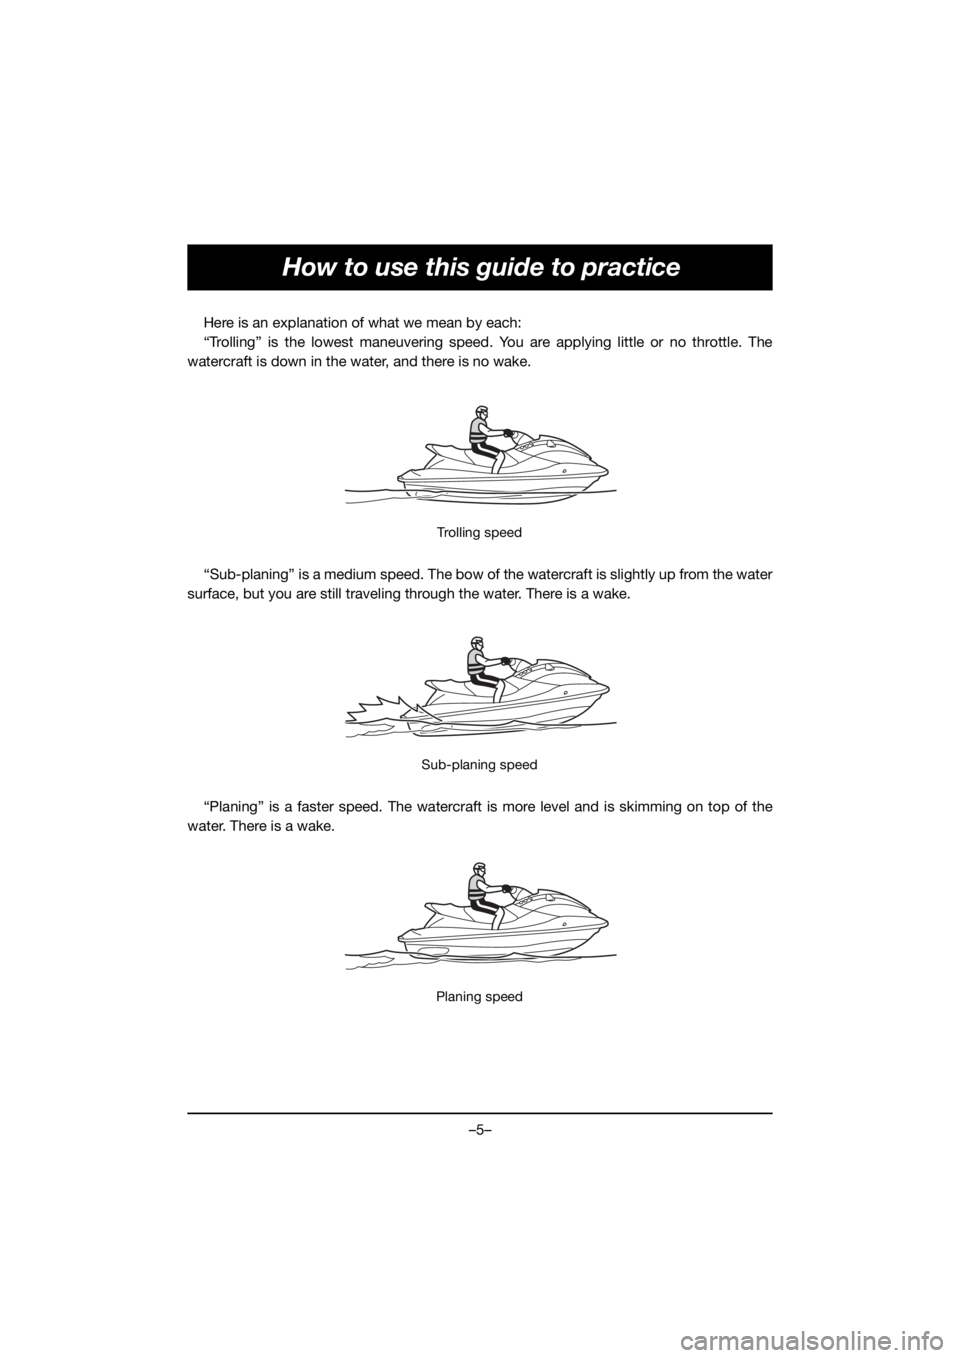 YAMAHA GP1800R SVHO 2021  Owners Manual –5–
How to use this guide to practice
Here is an explanation of what we mean by each:
“Trolling” is the lowest maneuvering speed. You are applying little or no throttle. The
watercraft is down